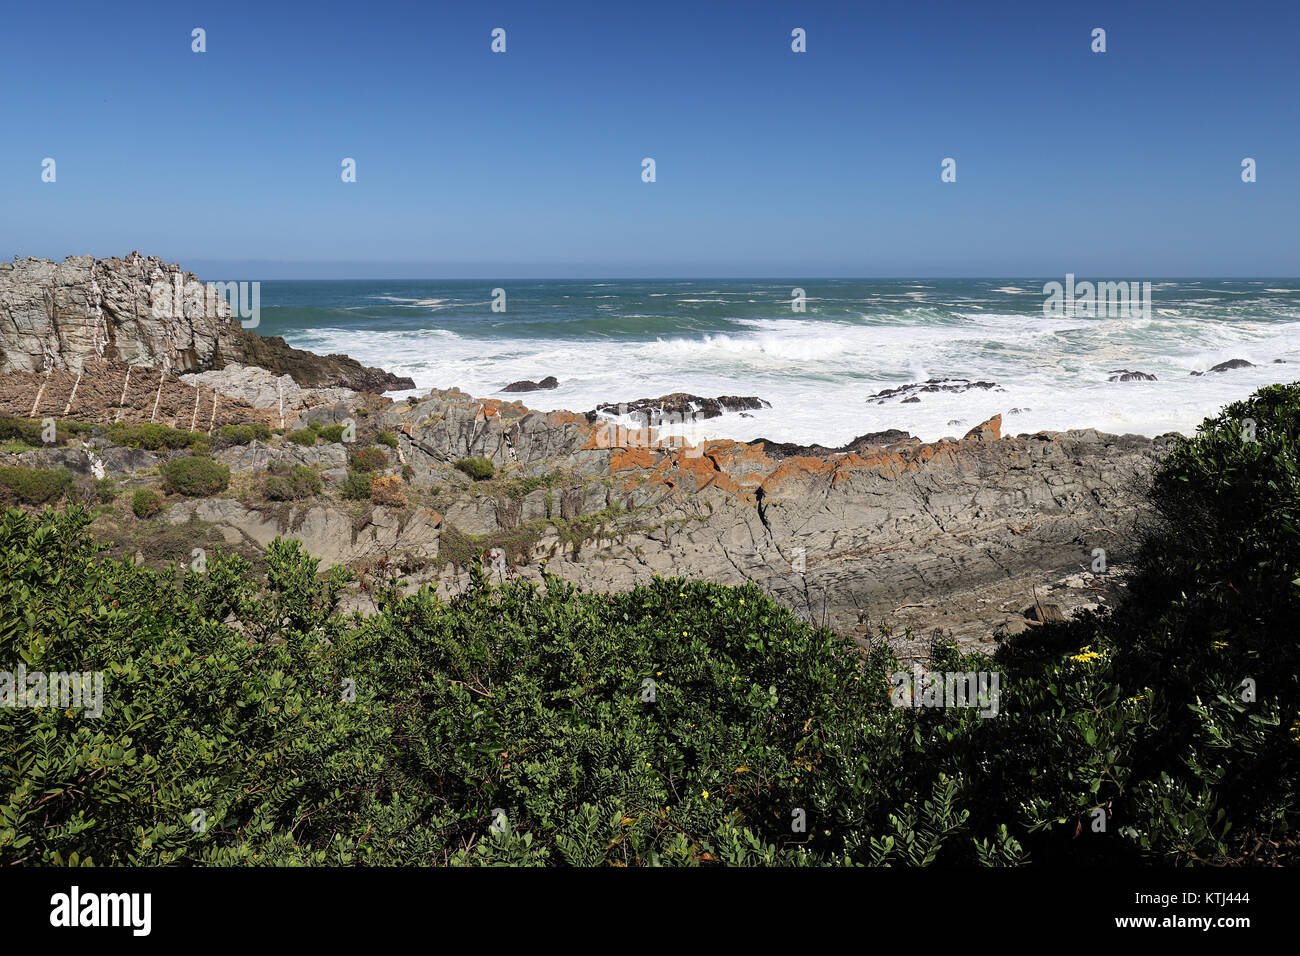 Landscape of Tsitsikamma National Park at Garden Route, South Africa Stock Photo